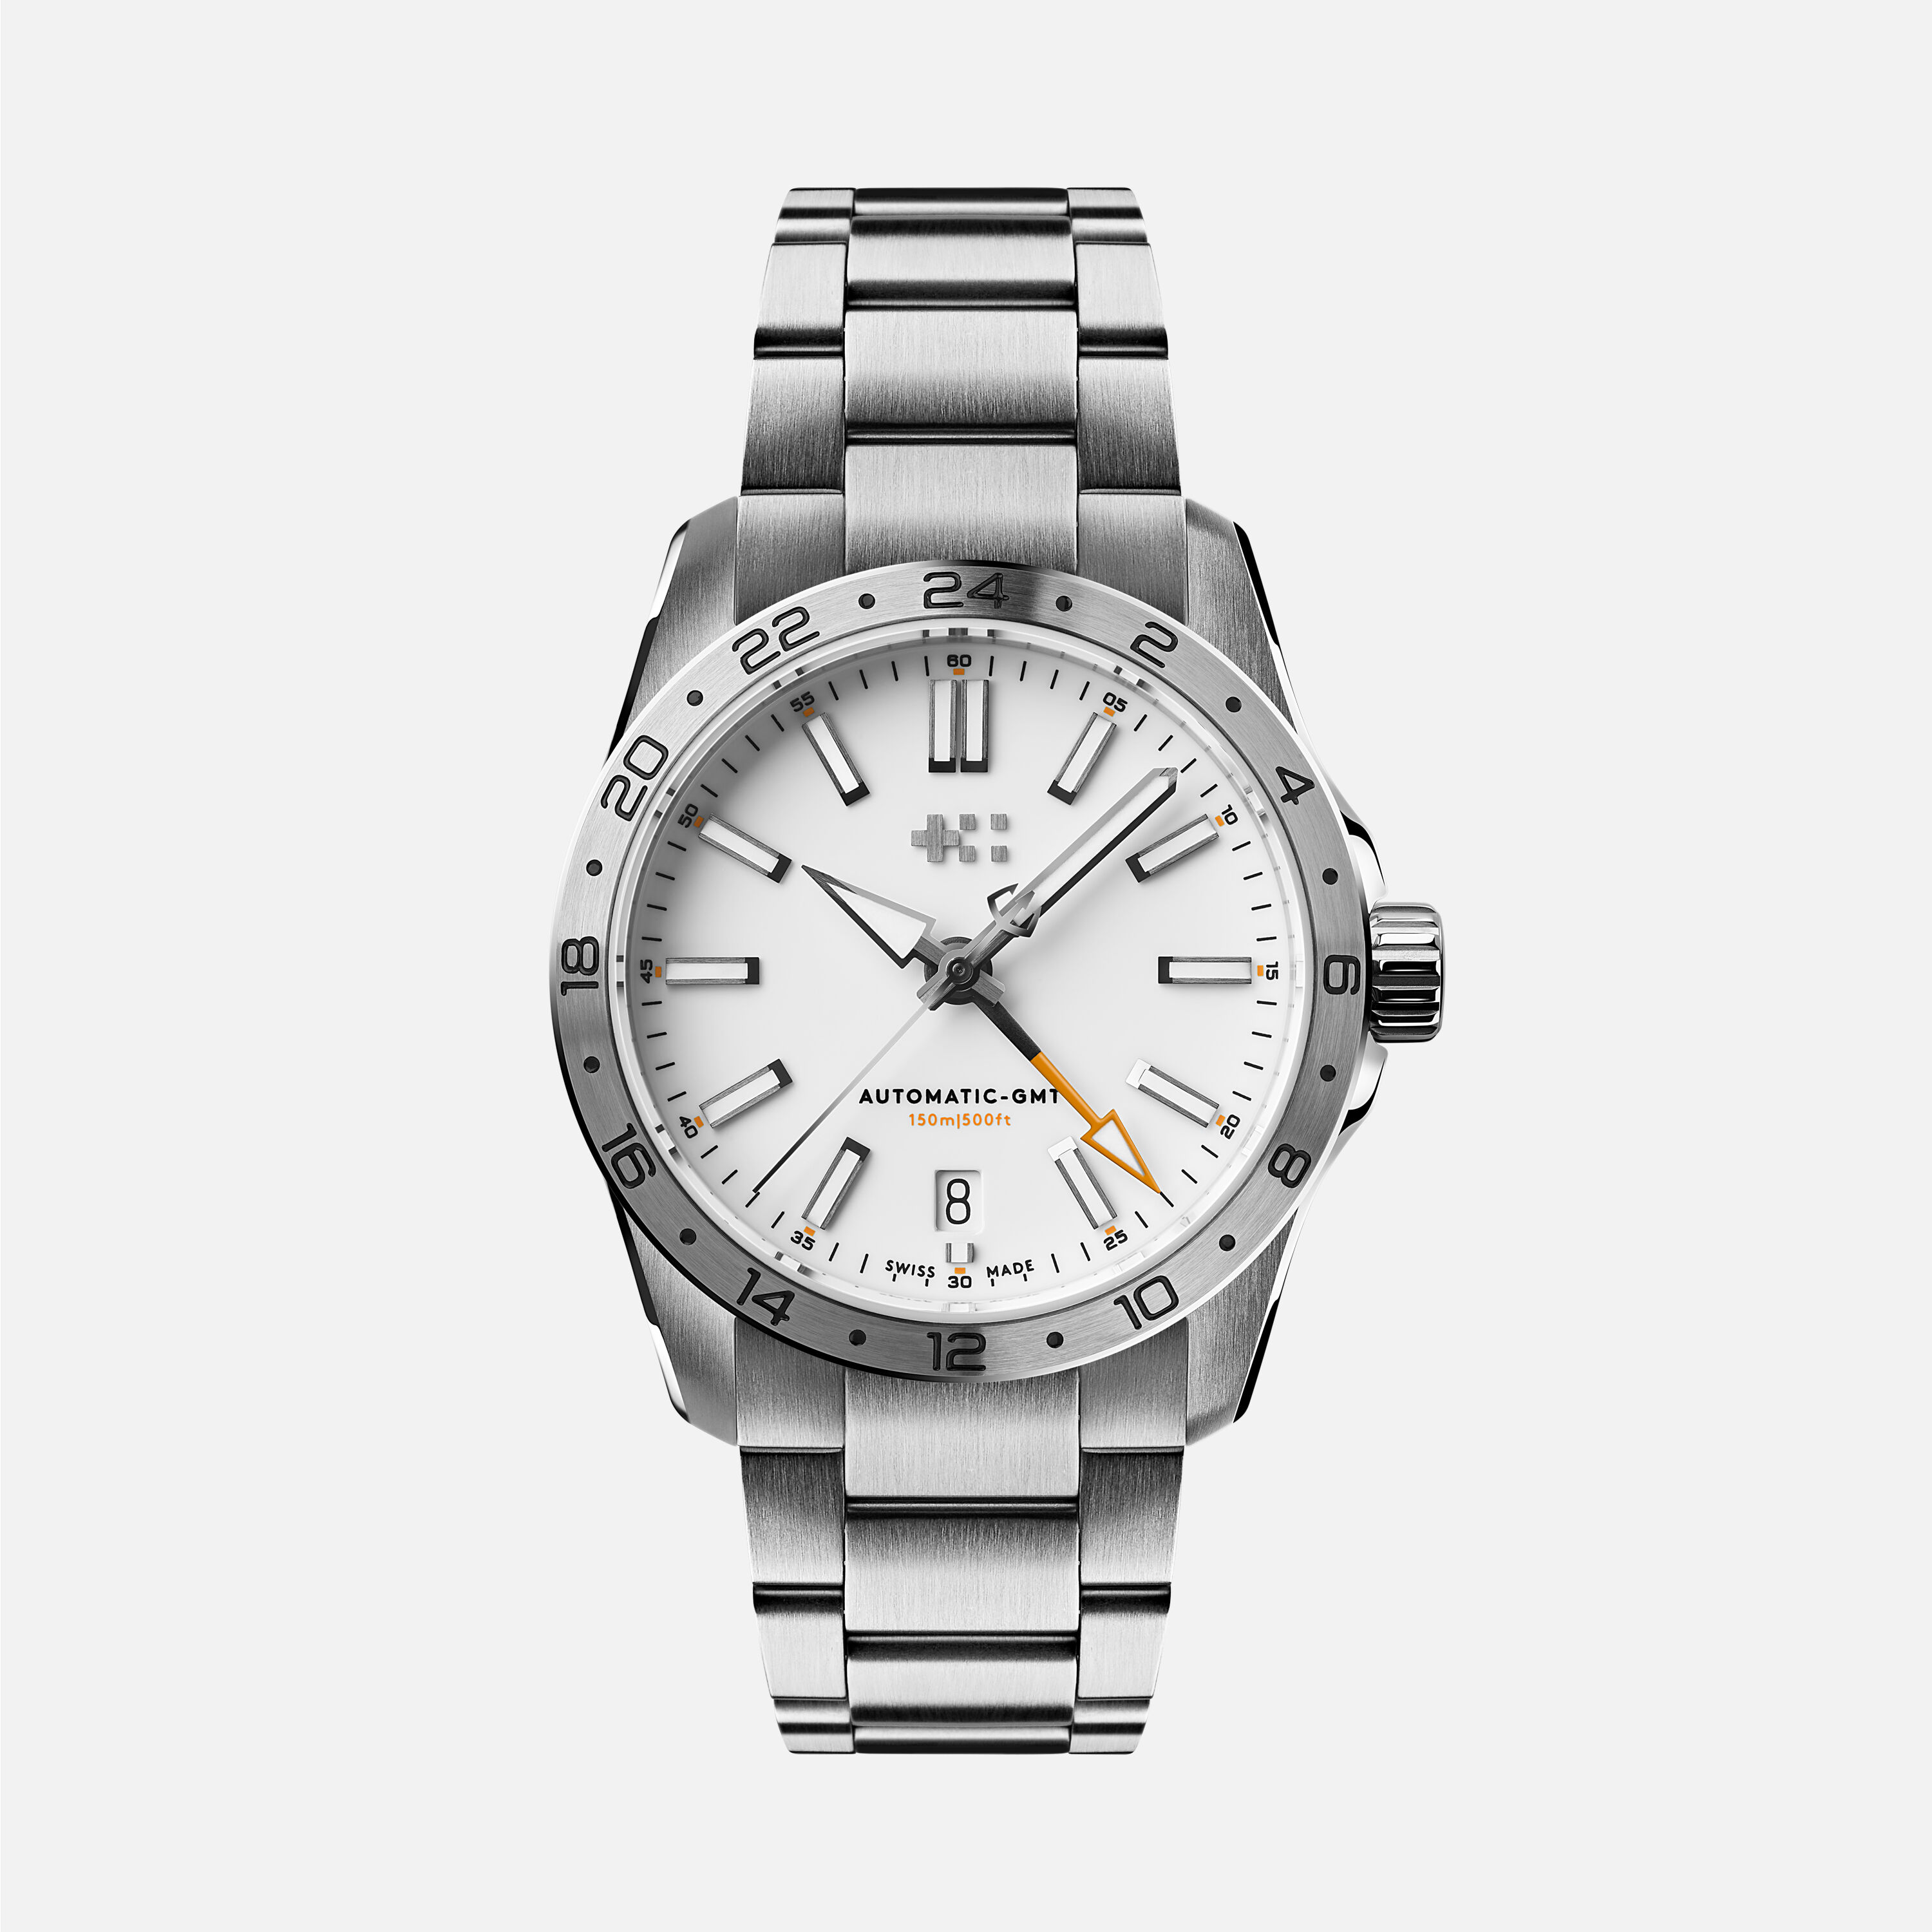 Christopher Ward C1 Moonglow Watch - Bob's Watches